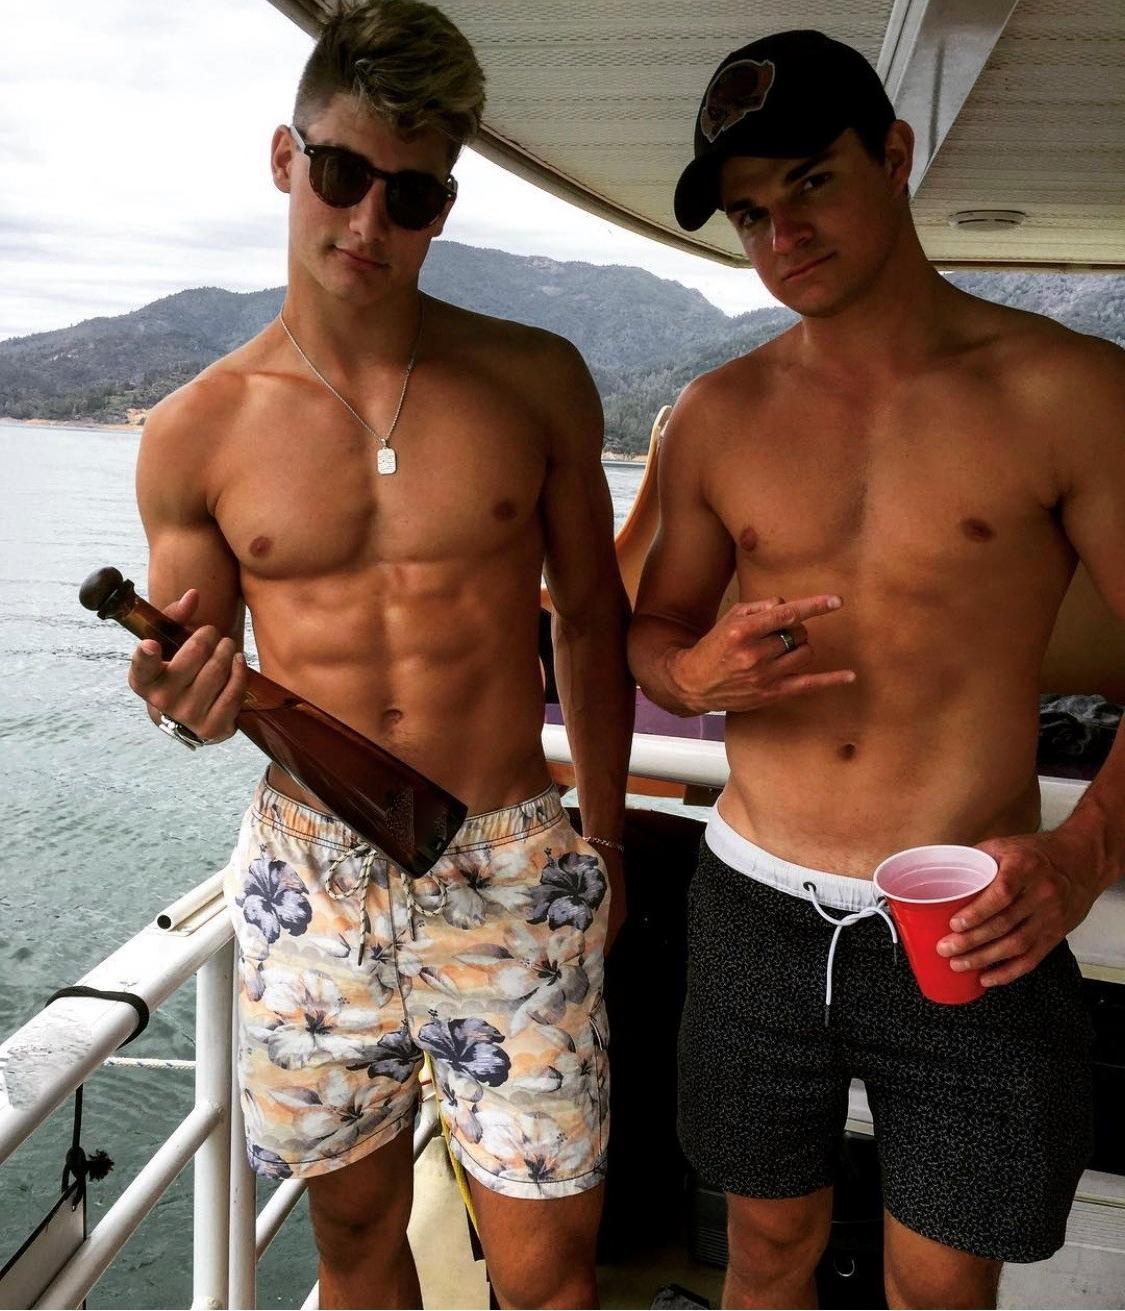 two-classic-bad-boys-young-shirtless-college-studs-fit-hunks-drinking-boat-party